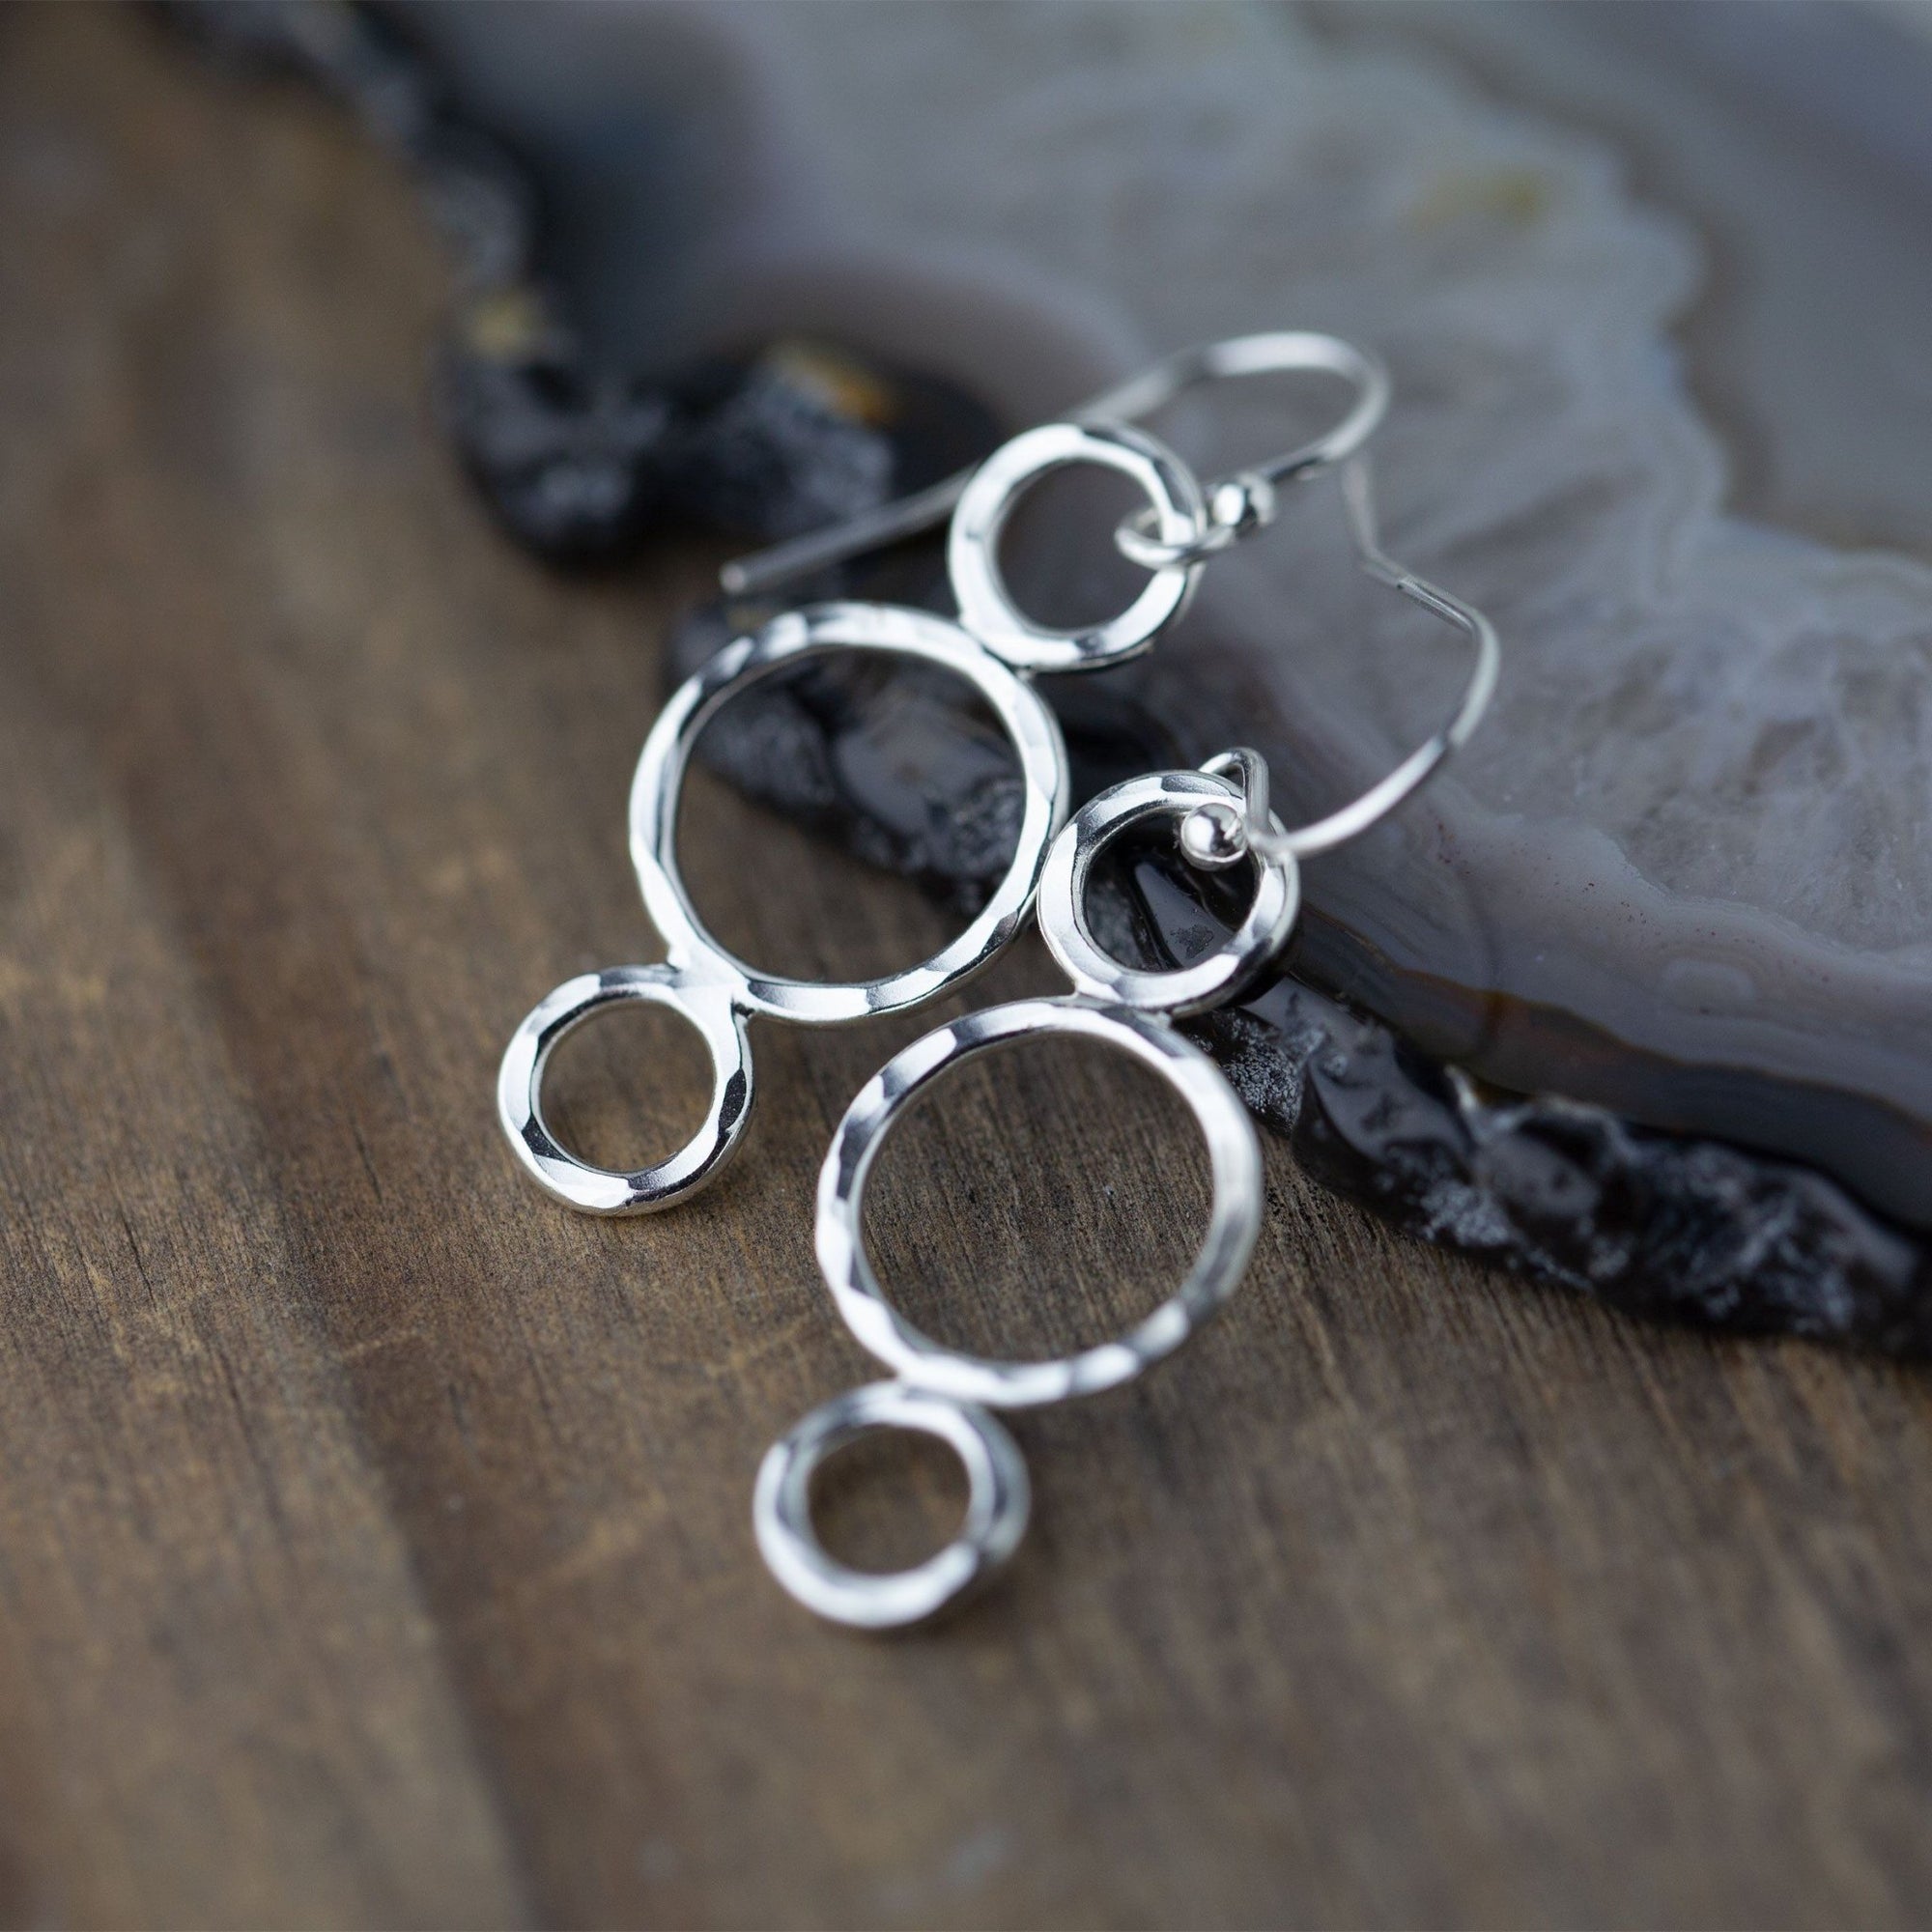 Circle Trio Hammered Silver Earrings - Handmade Jewelry by Burnish